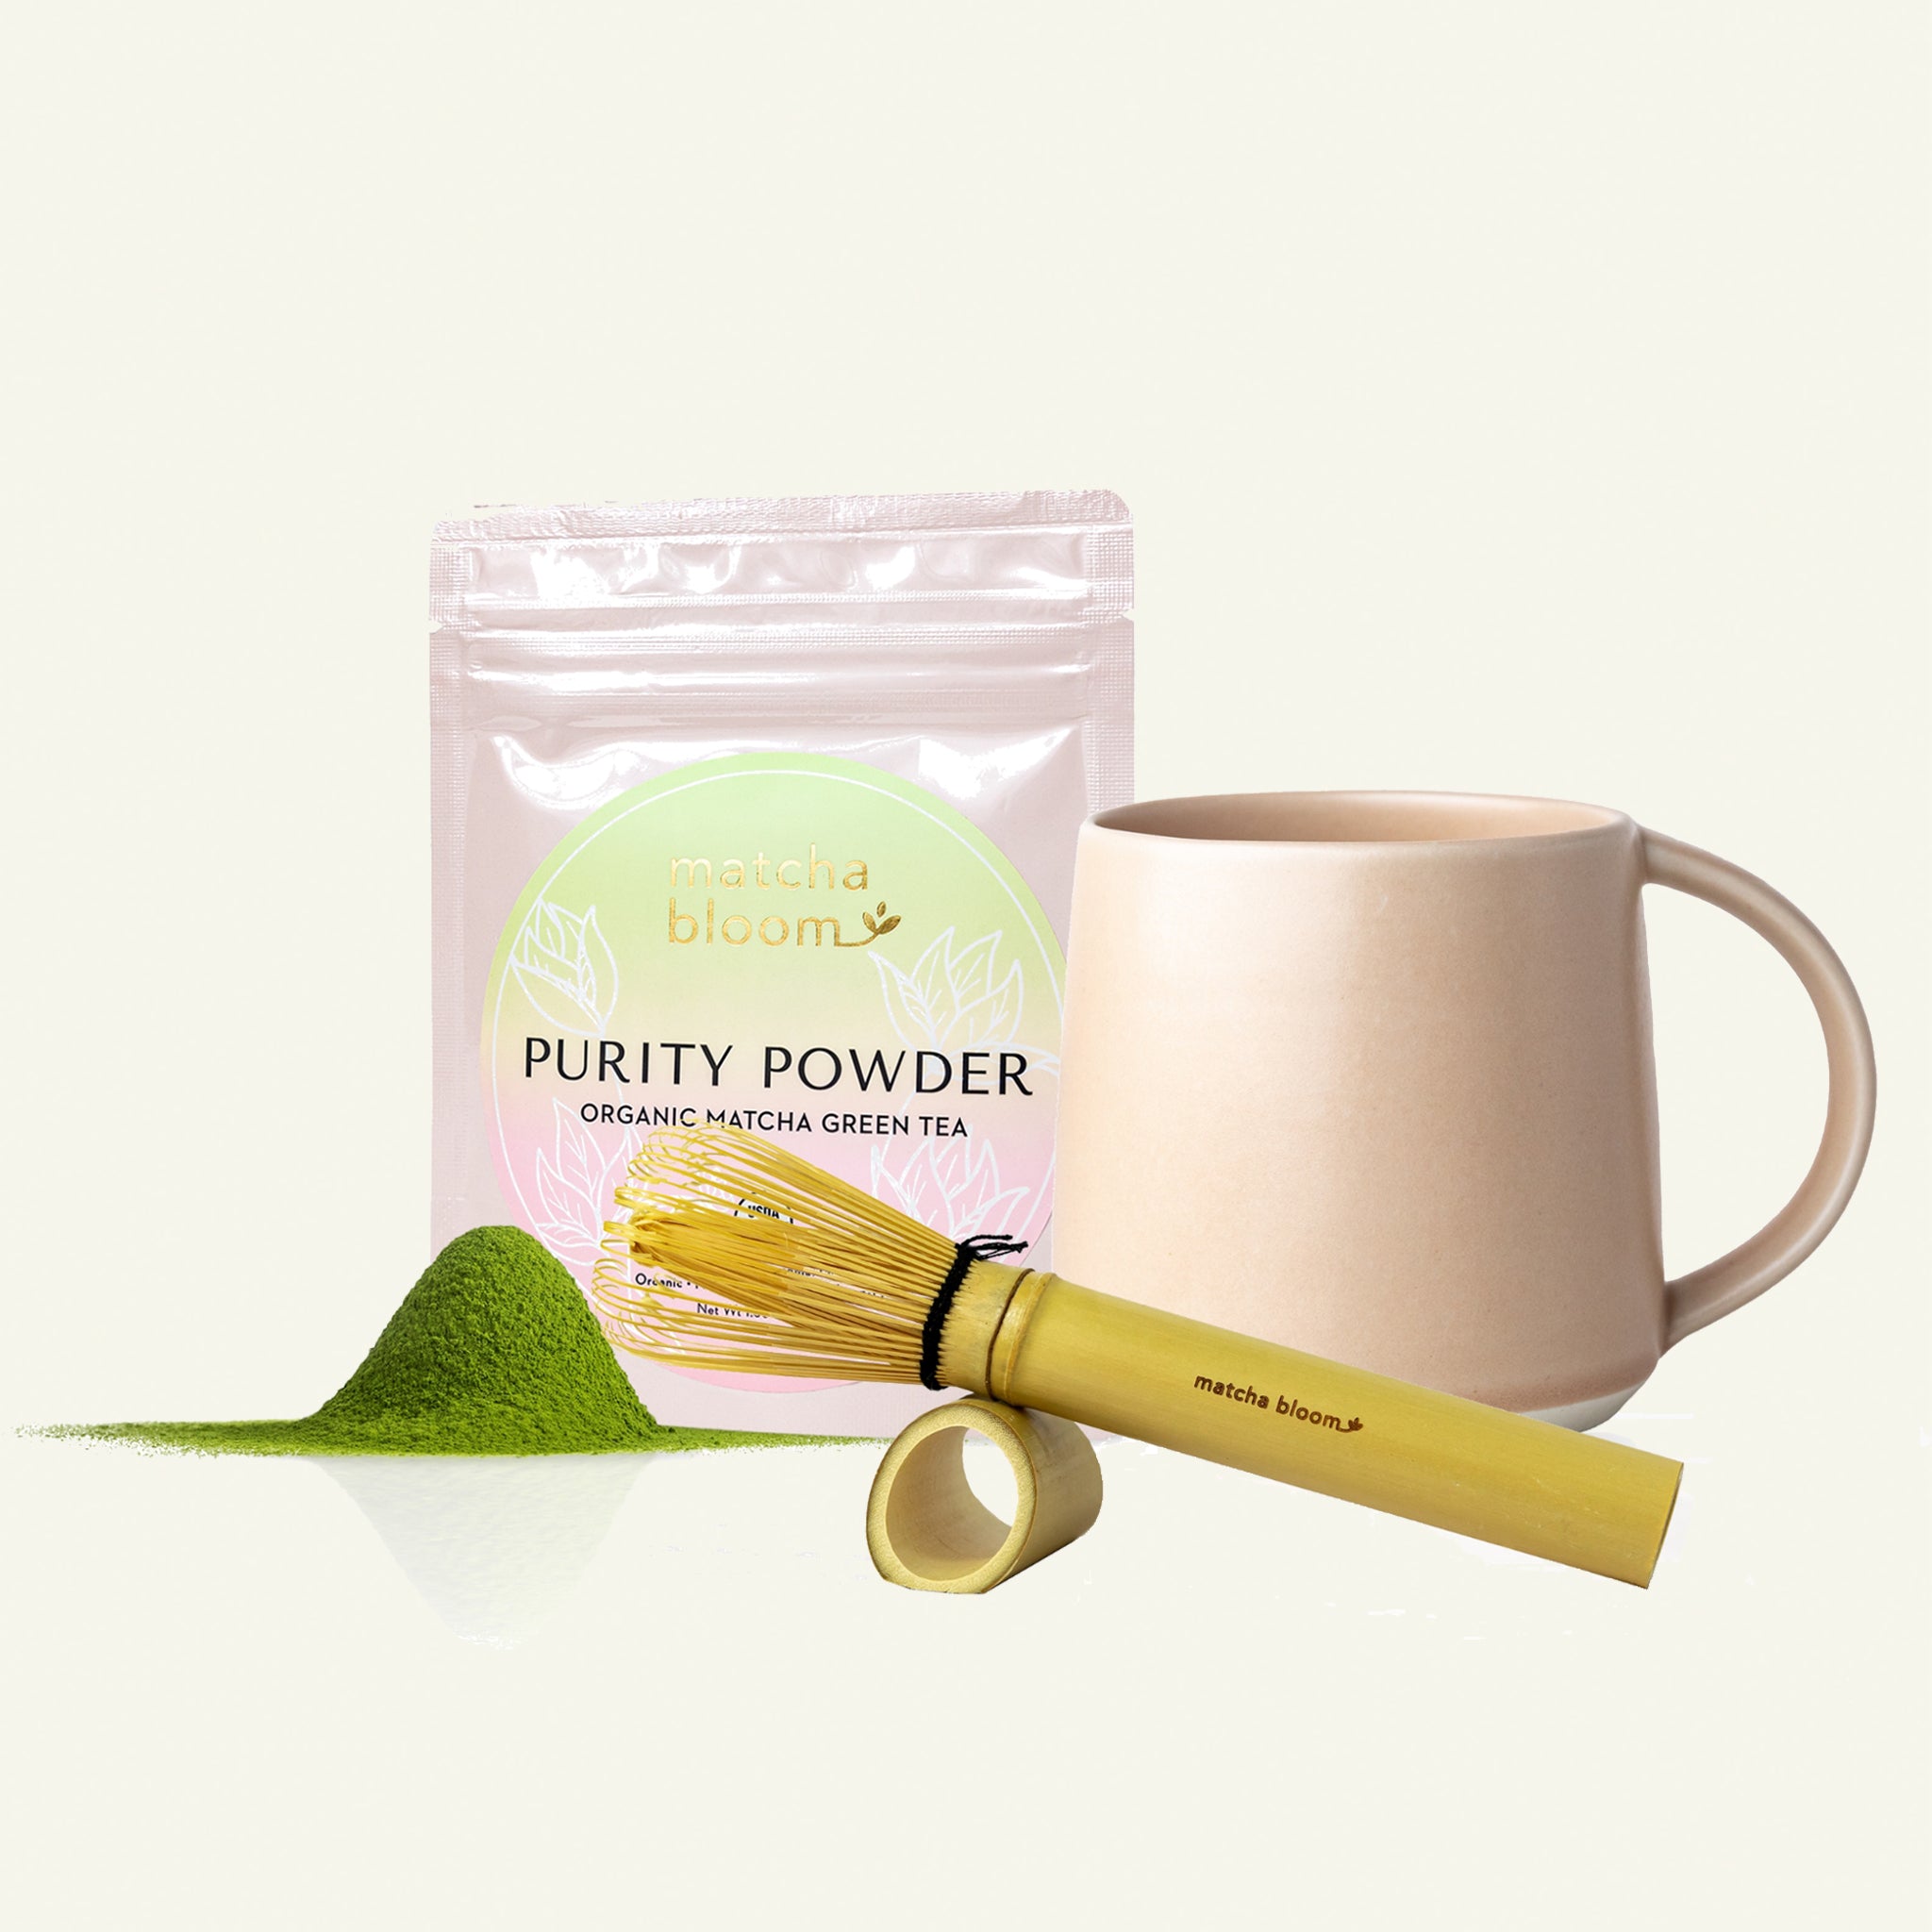 Whisk A Quick At Home Matcha Latte • Tasty Thrifty Timely